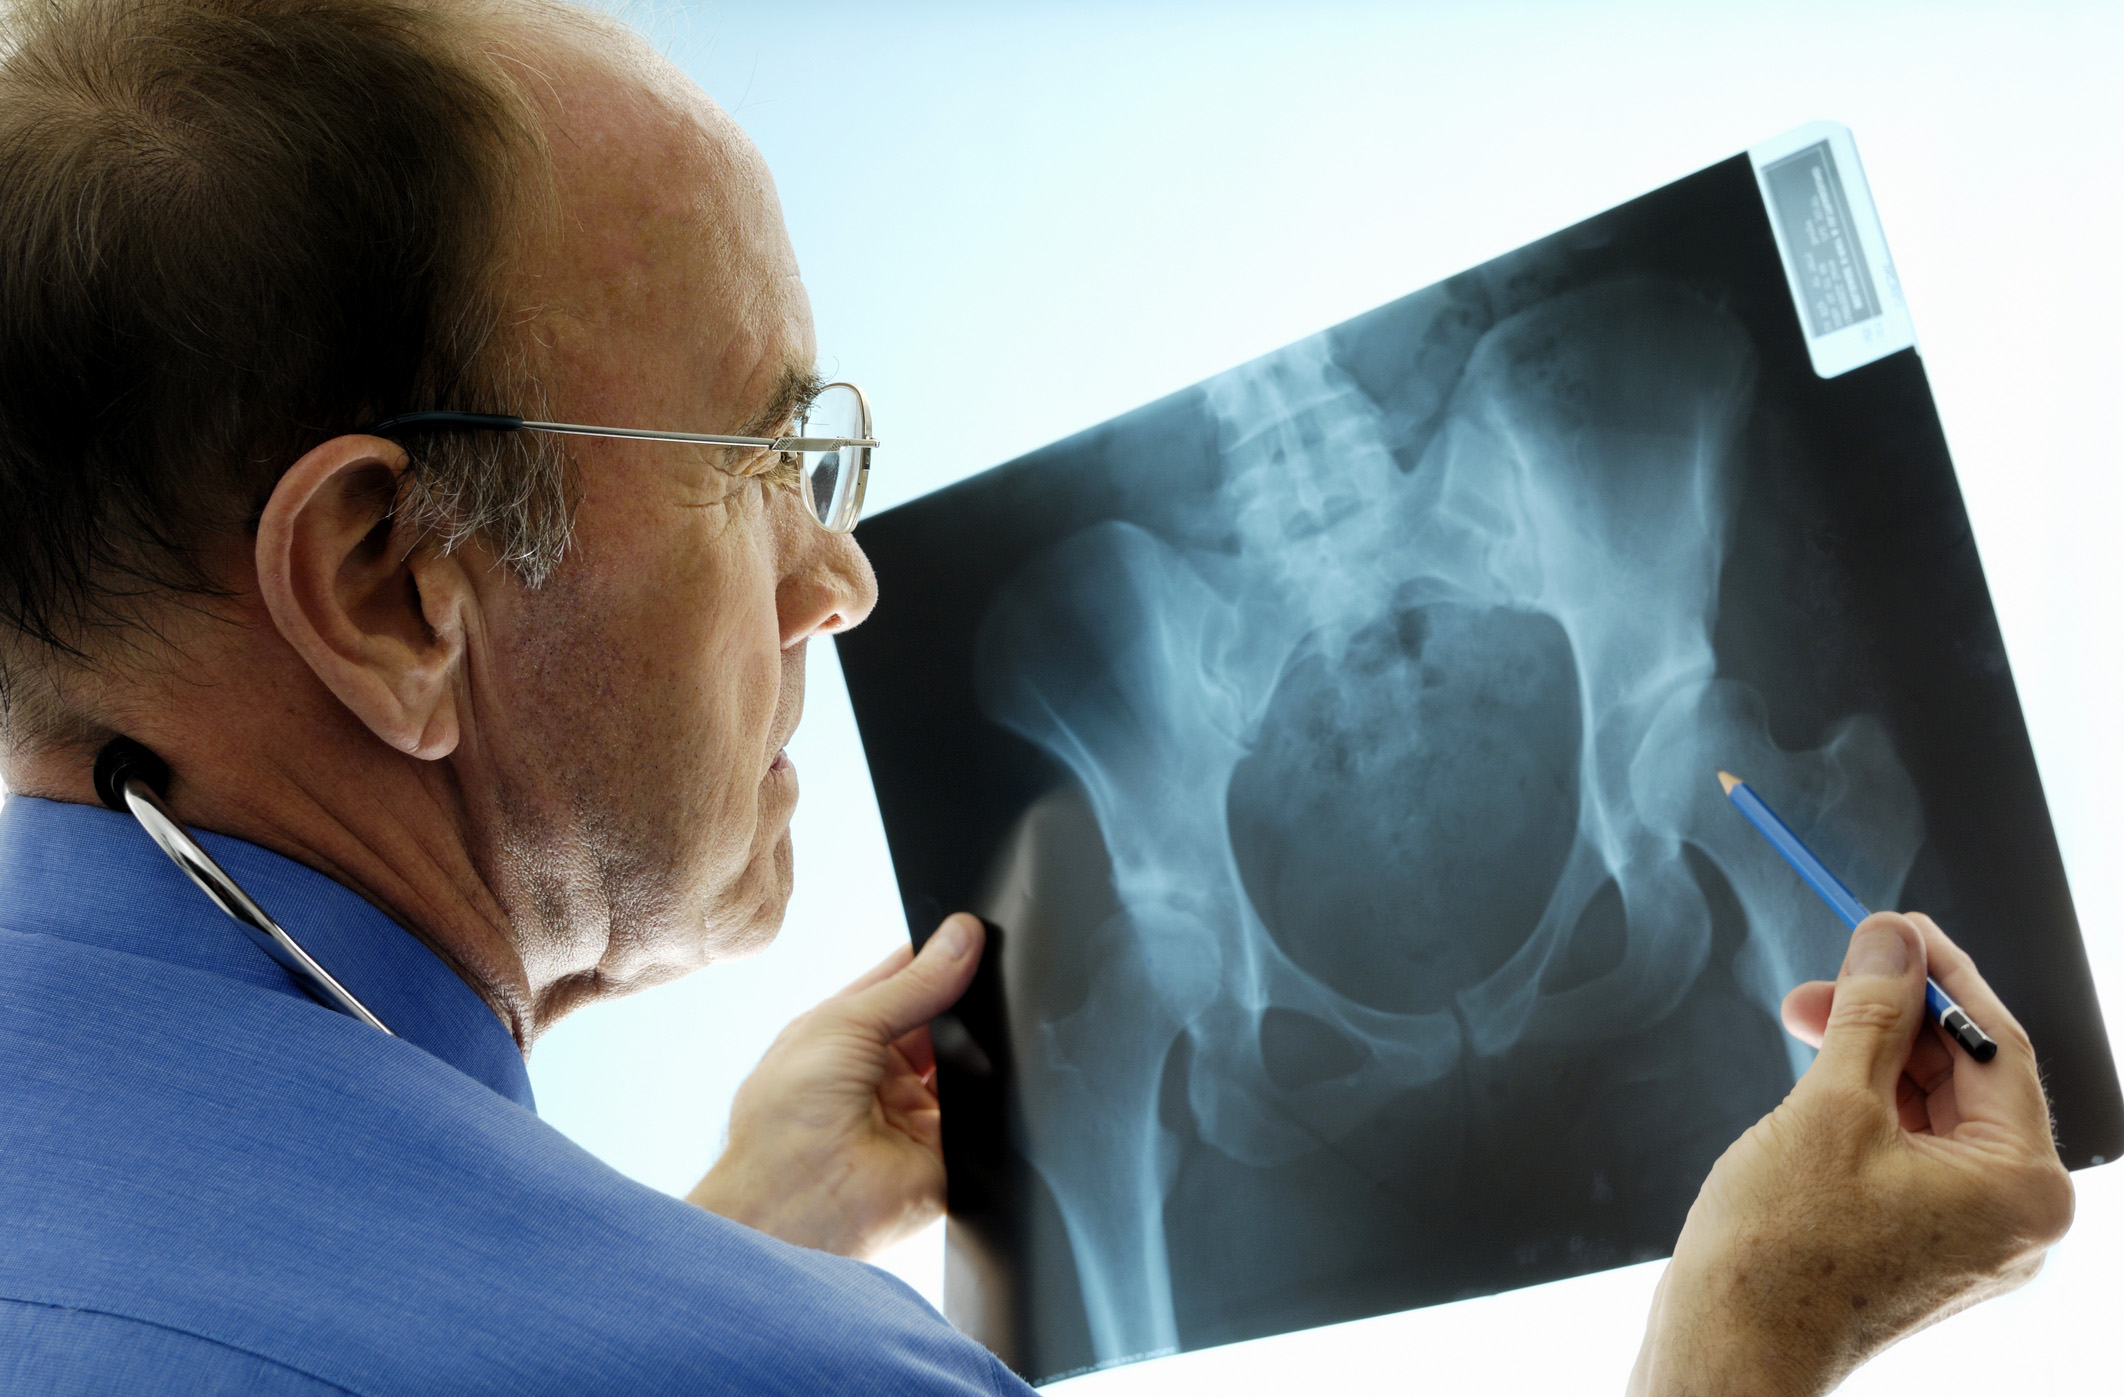 Orthopedic surgeon consulting pelvic x-rays for a hip replacement.